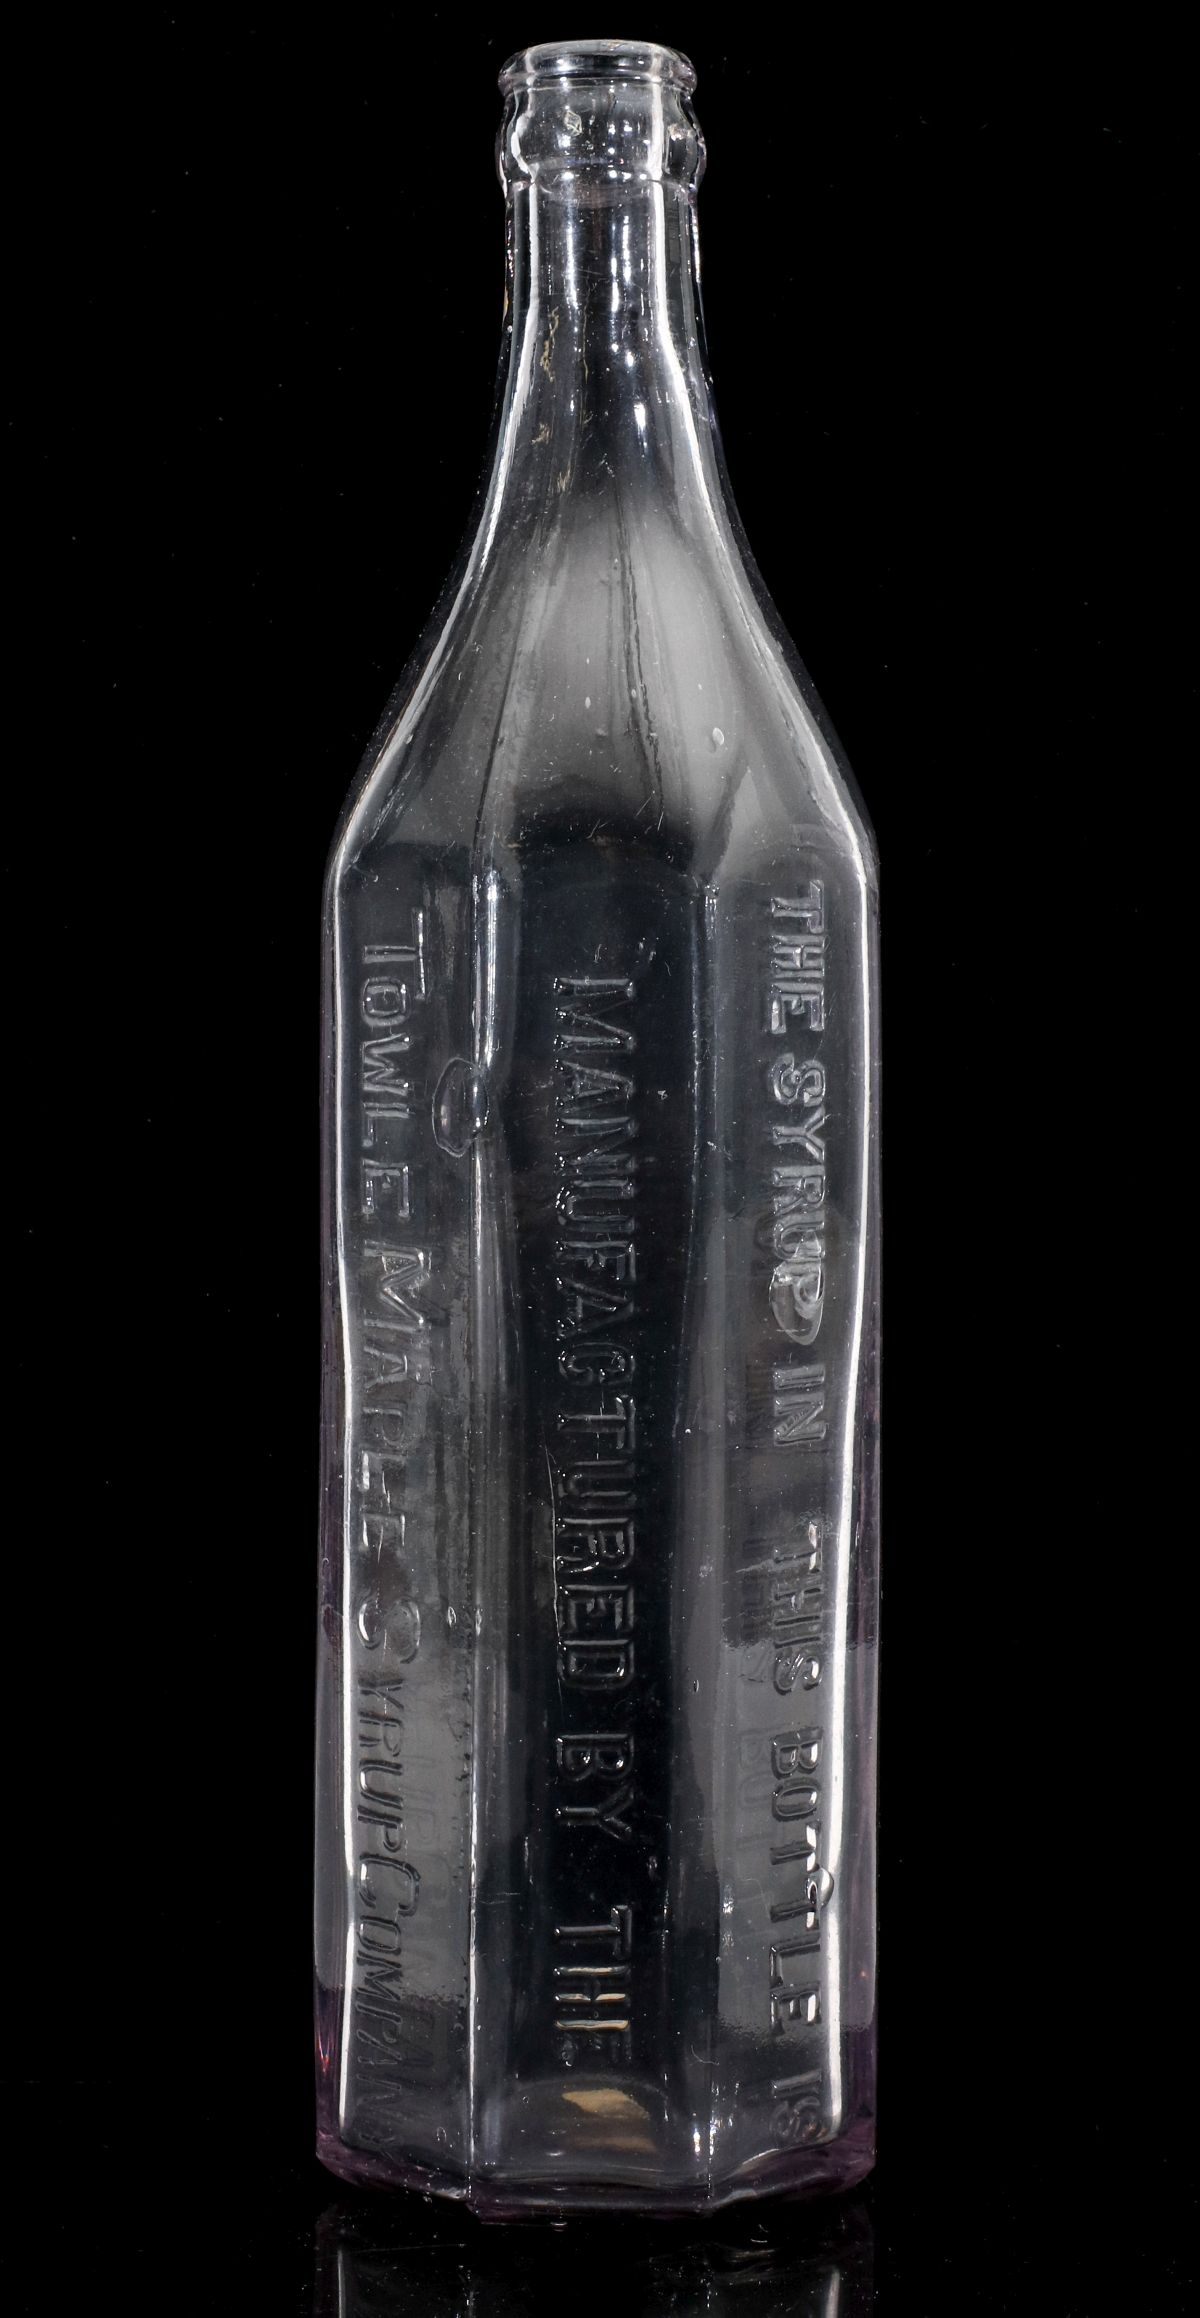 AN EARLY EIGHT-SIDED LOG CABIN SYRUP BOTTLE